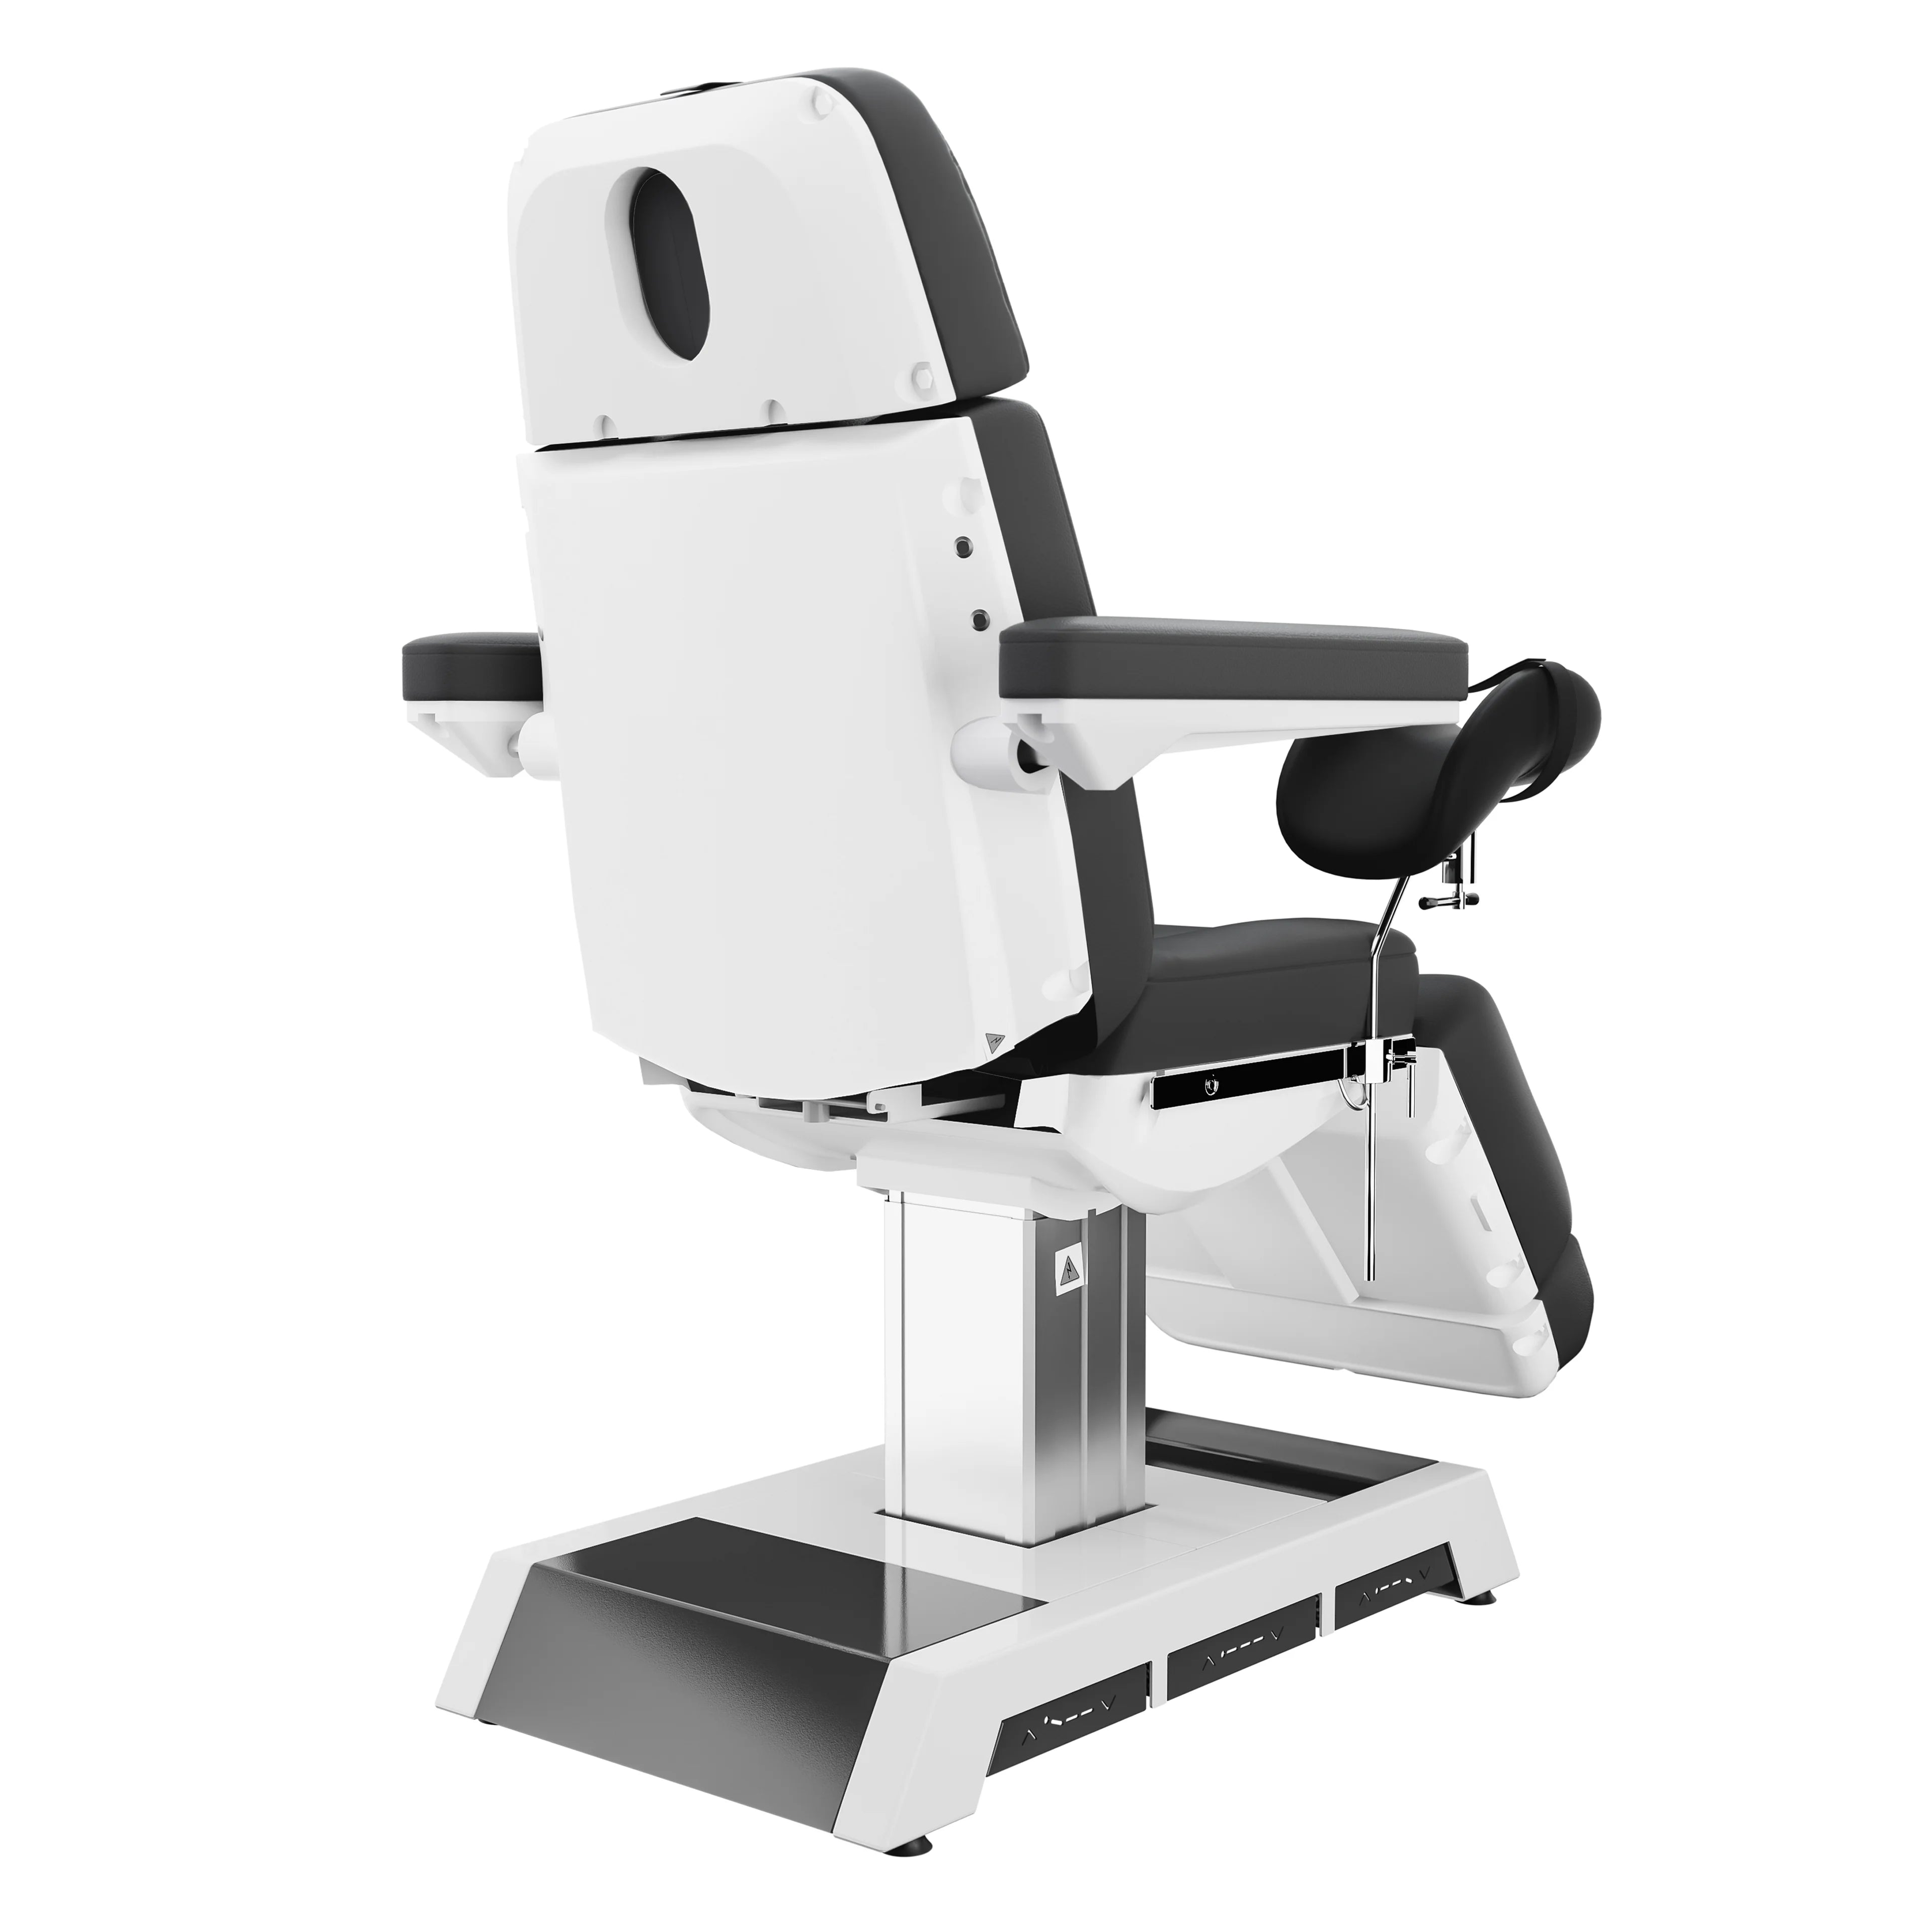 SPAMARC . Adones (Gray) . OBGYN & GYNECOLOGY . STIRRUPS . 4 MOTOR SPA TREATMENT CHAIR/BED